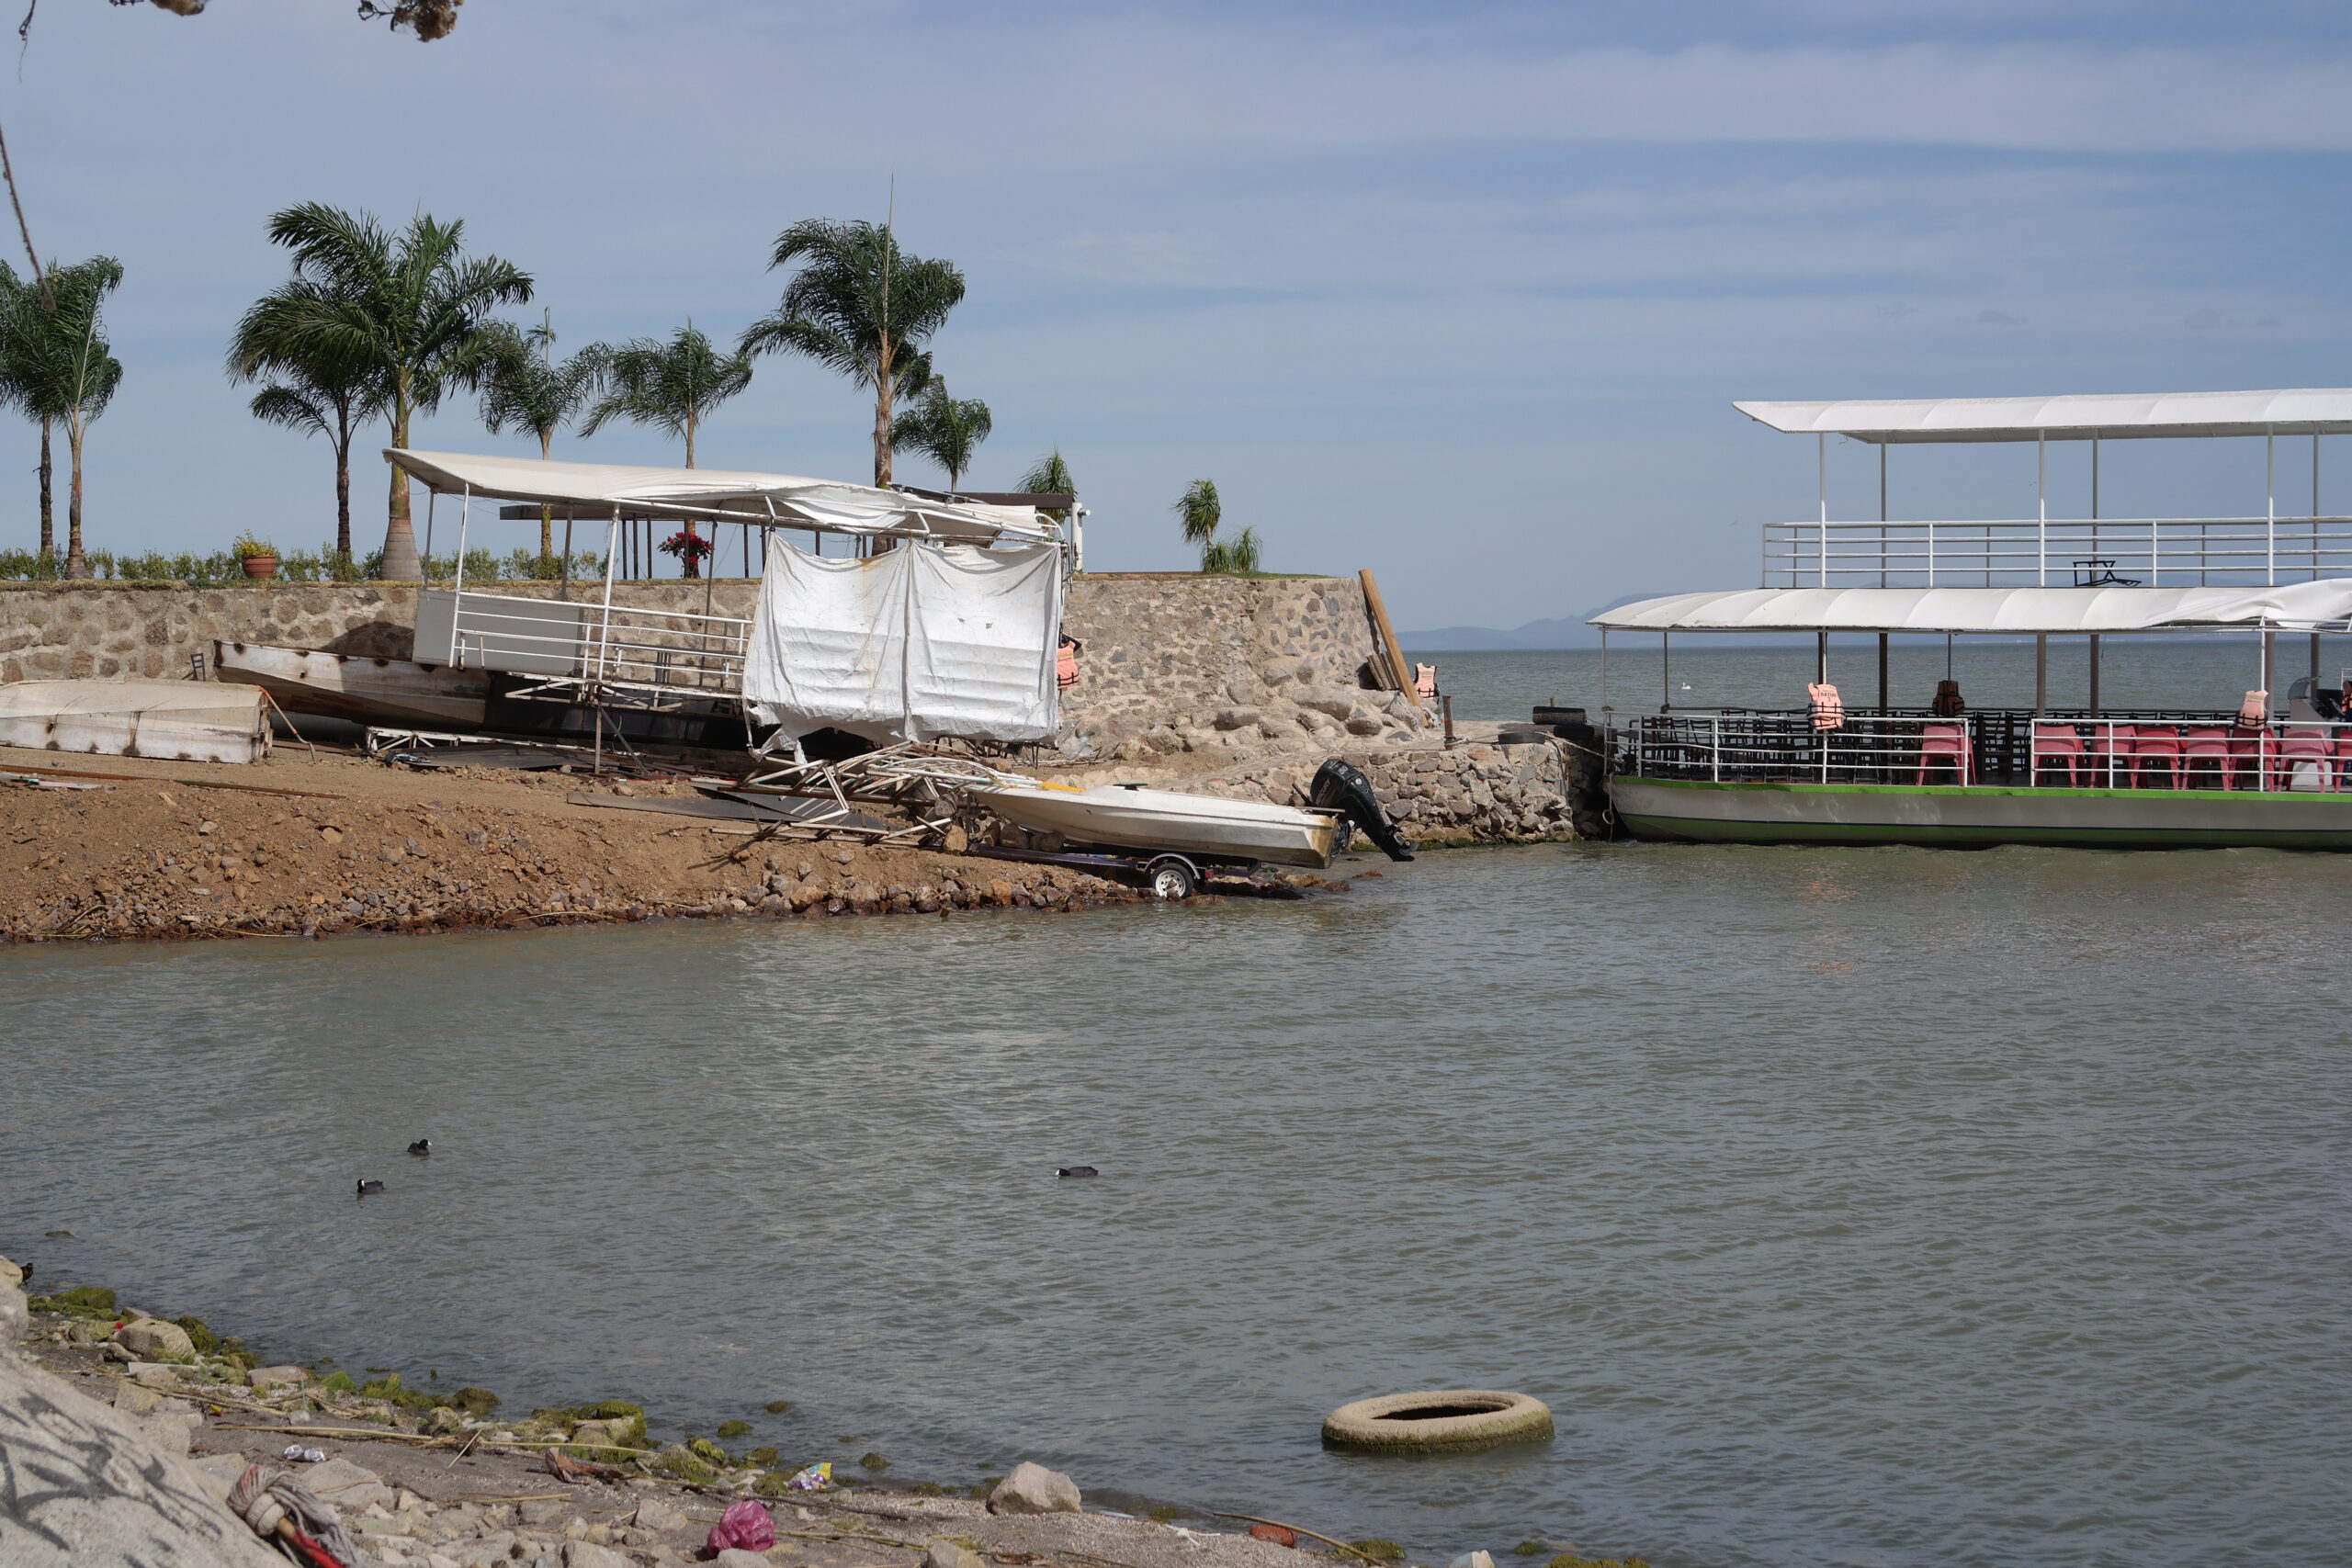 Jocotepec official calls report of alleged lake invasion “absurd words”